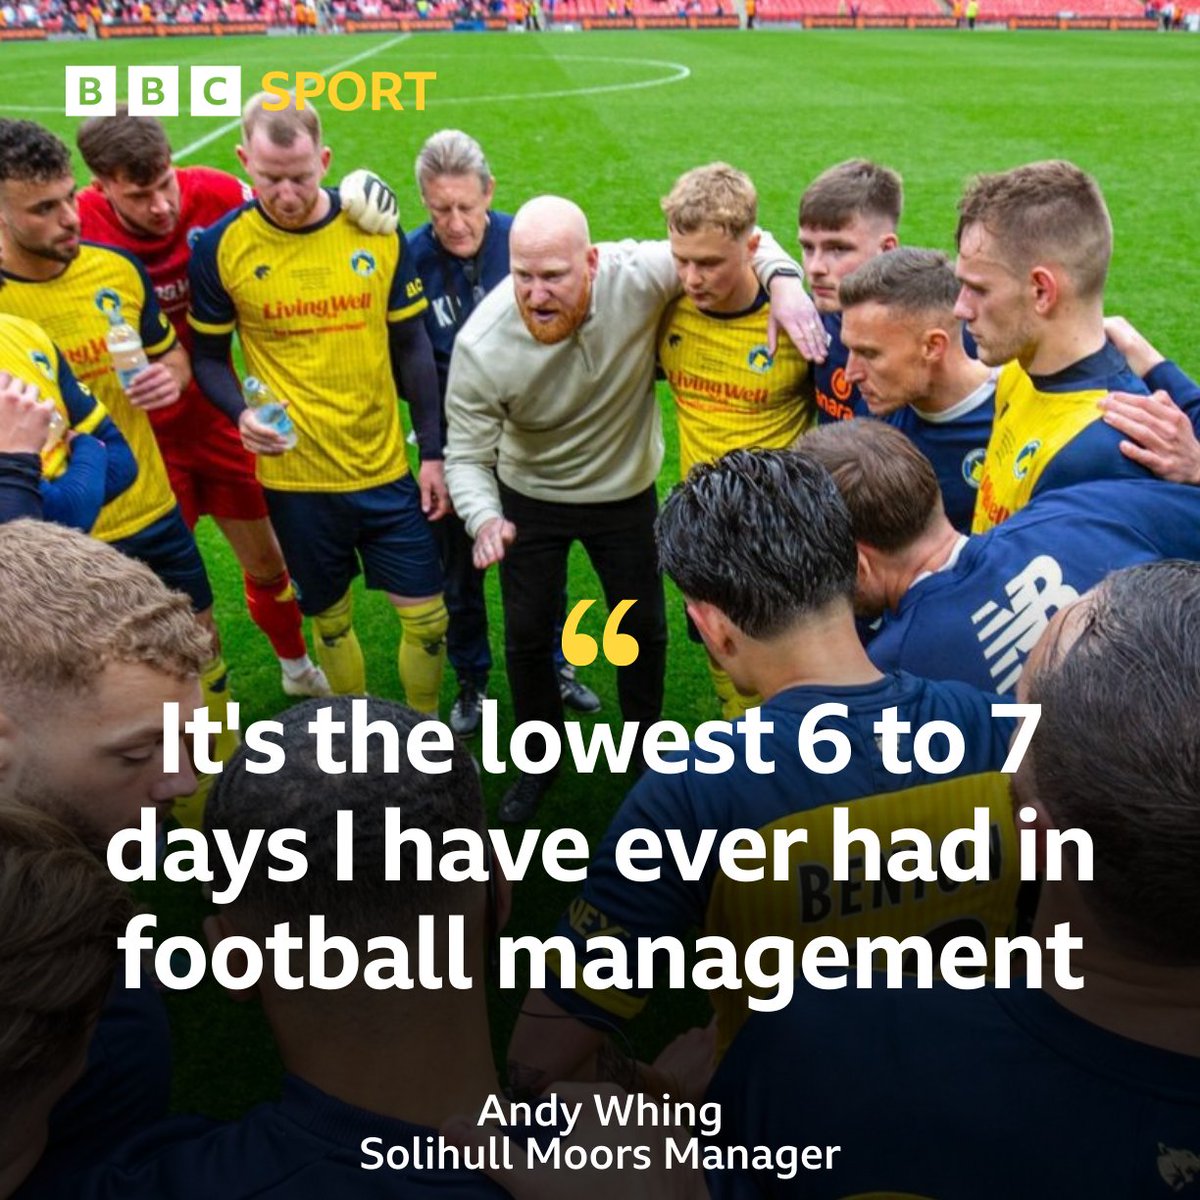 Hear from the former Sky Blues manager and current Solihull Moors manager Andy Whing after he spoke to @RobGurneyOnAir & @cliveeakin in the week on the recent defeats at Wembley. Listen here: bbc.in/44TT4un